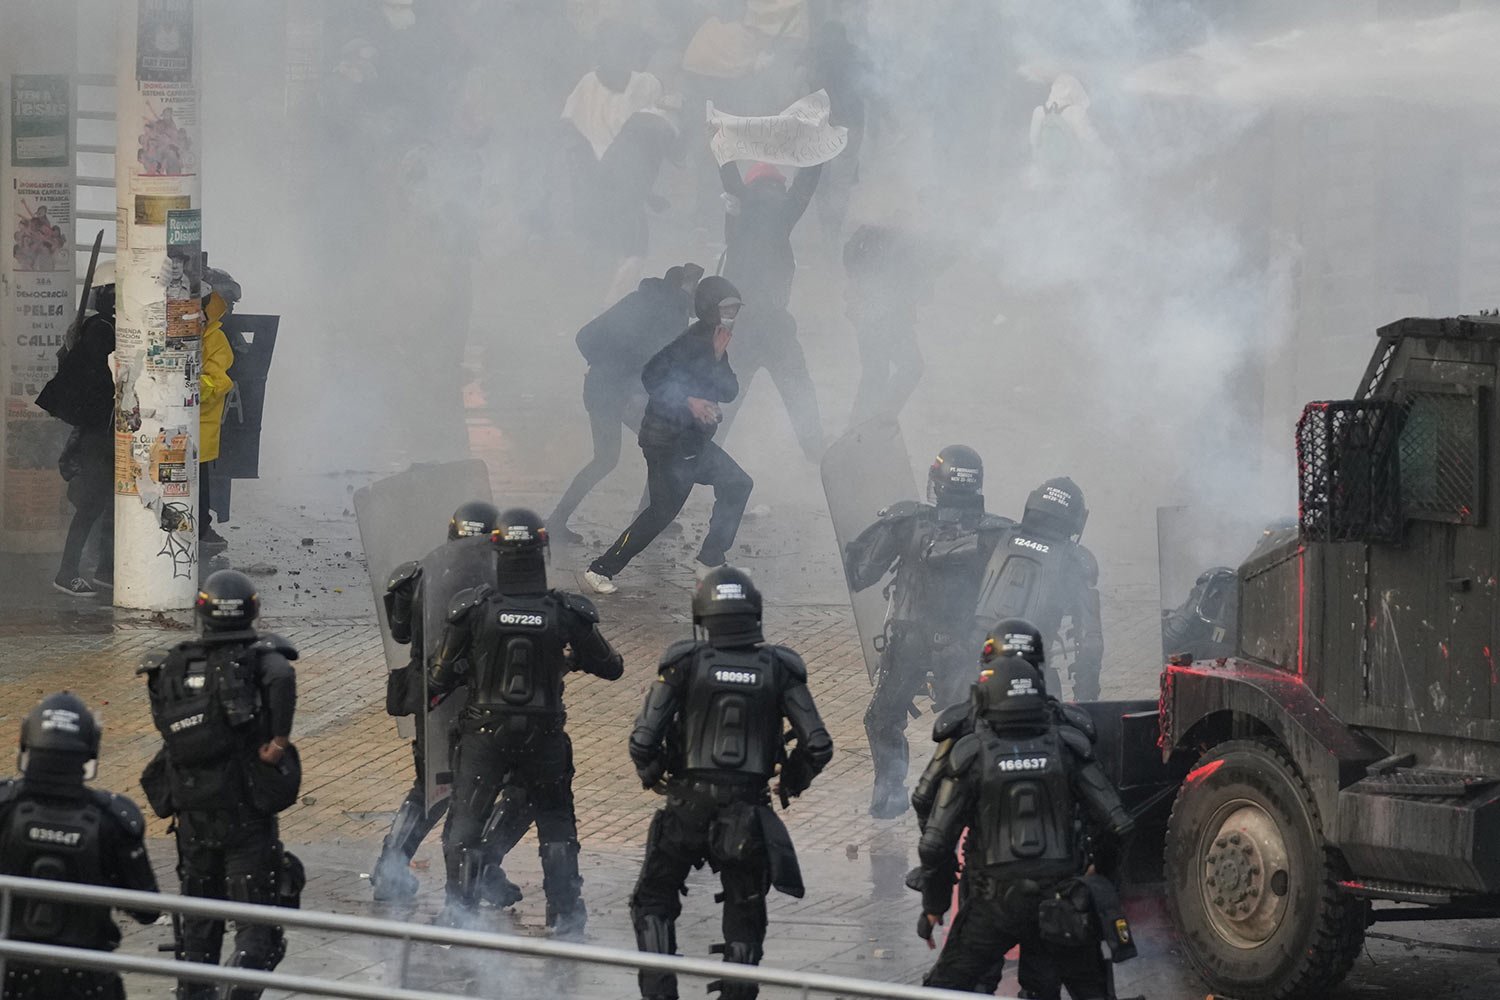  University students and police clash after an event commemorating the previous year's strike against a government-proposed tax reform that turned violent in Bogota, Colombia, April 28, 2022. (AP Photo/Fernando Vergara) 